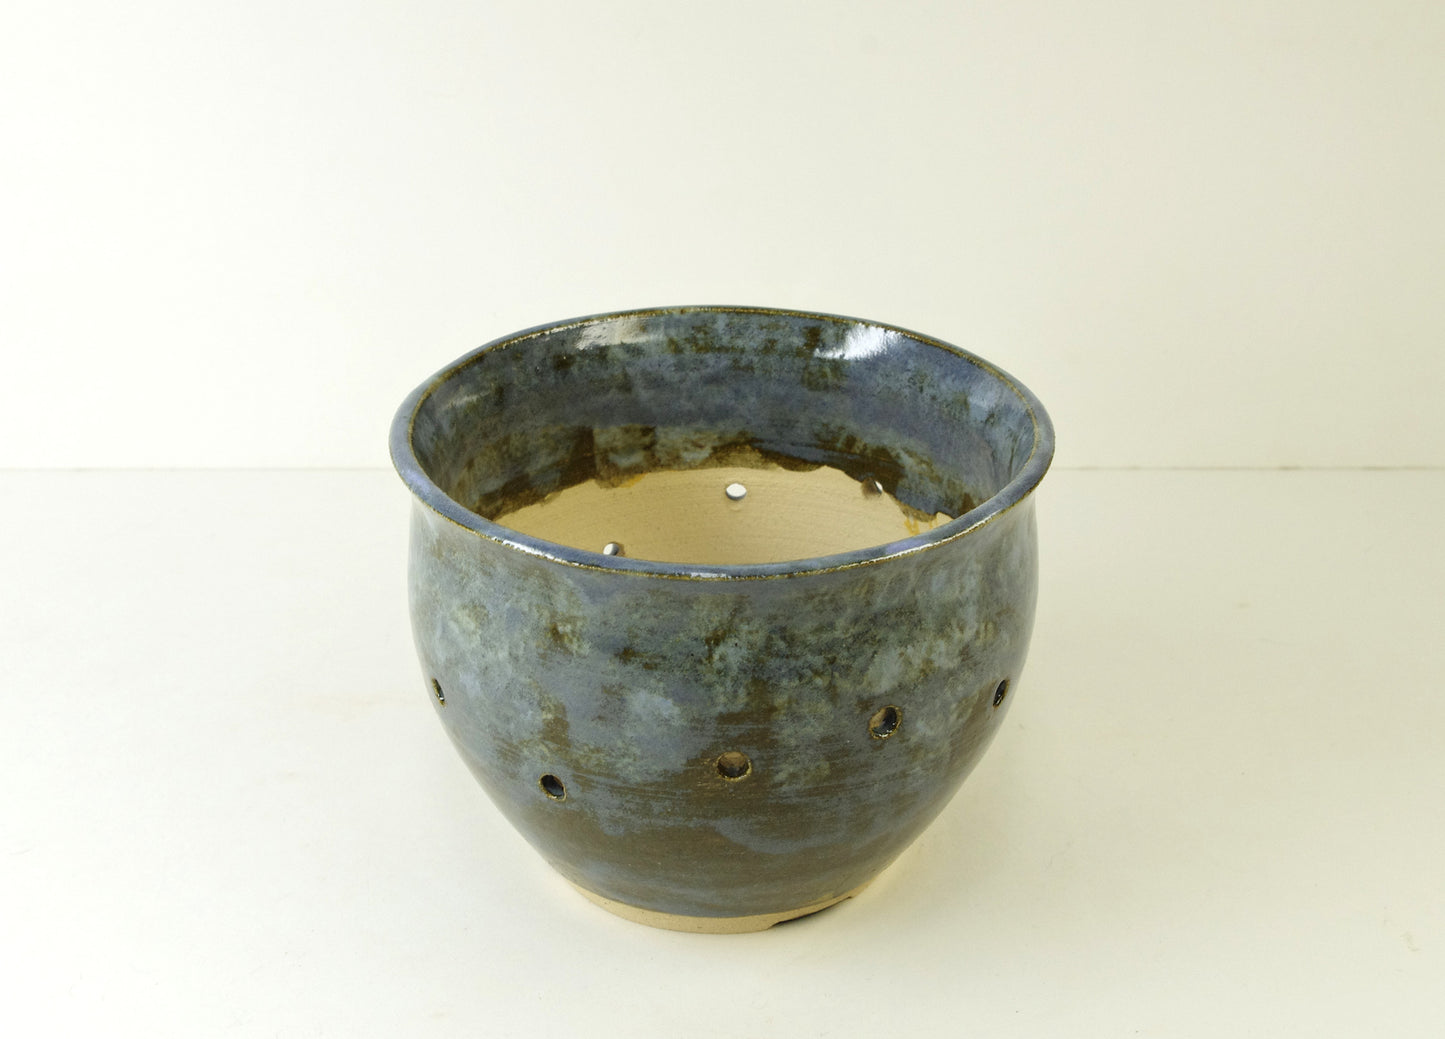 2038, Hand Thrown Stoneware Orchid Pot, Blues, Greenish Browns, 4 5/8 x 3 1/2